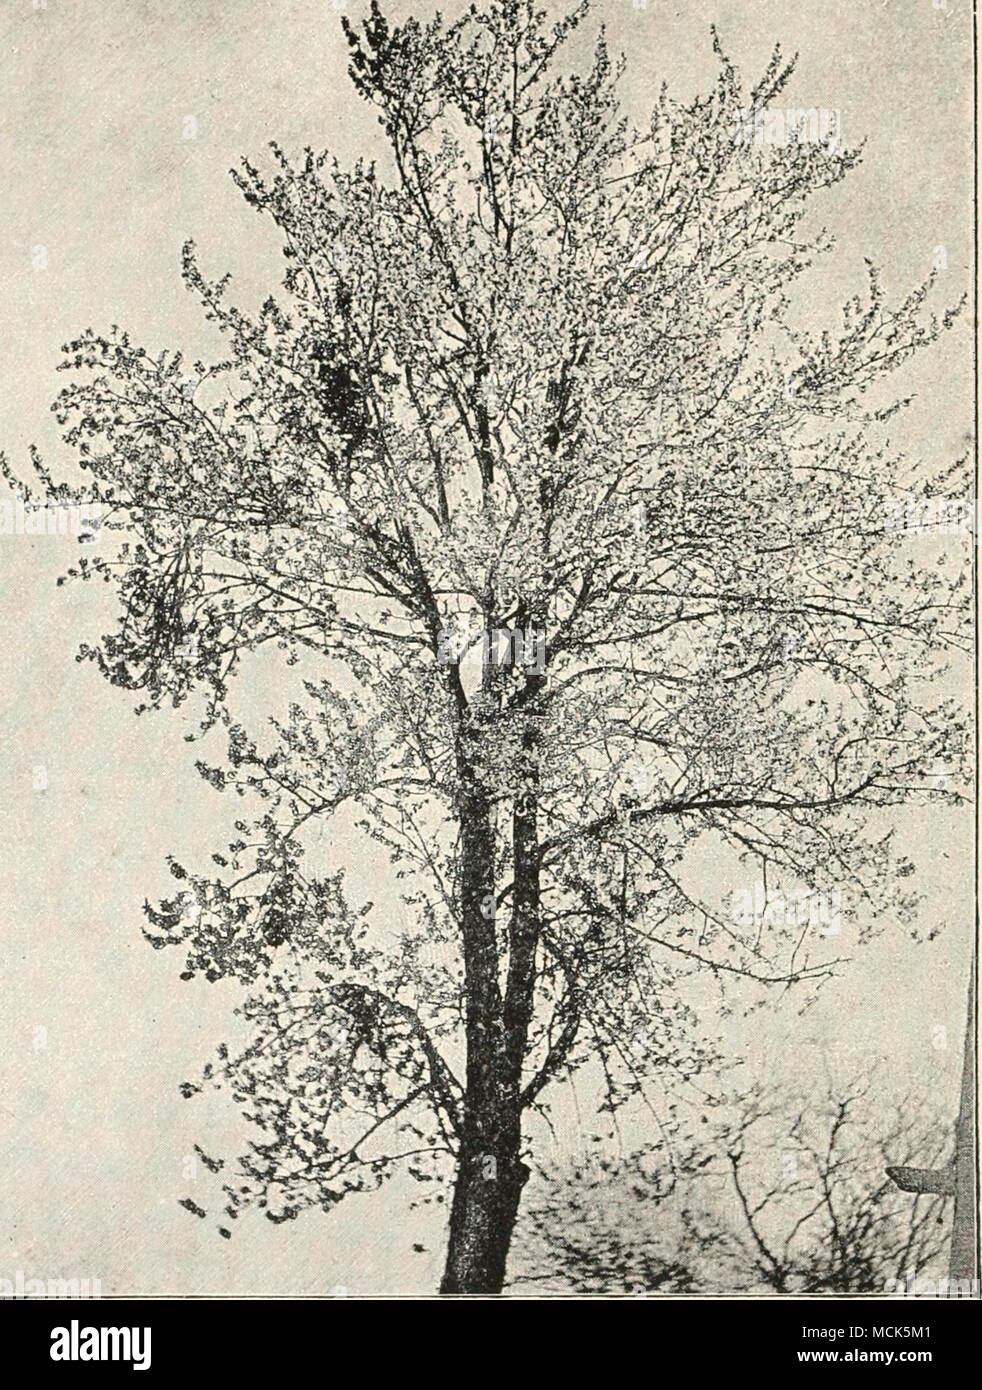 . Fig. 57.—E.coasciis cerasi on Prunus C'erasiu. Clicrry-treo in blossom, with the exception of four witches' brooms. The tree is as yet leafless except the brooms, which are in full foliage and show up dark. (v. Tubeuf phot.) Exoascus carpini Eostr. is common on Carpinus Betukts (horn- beam) (Fig. 55). The brooms produced are bushy and densely leafed; the twigs are thickened and much branched; the leaves Stock Photo